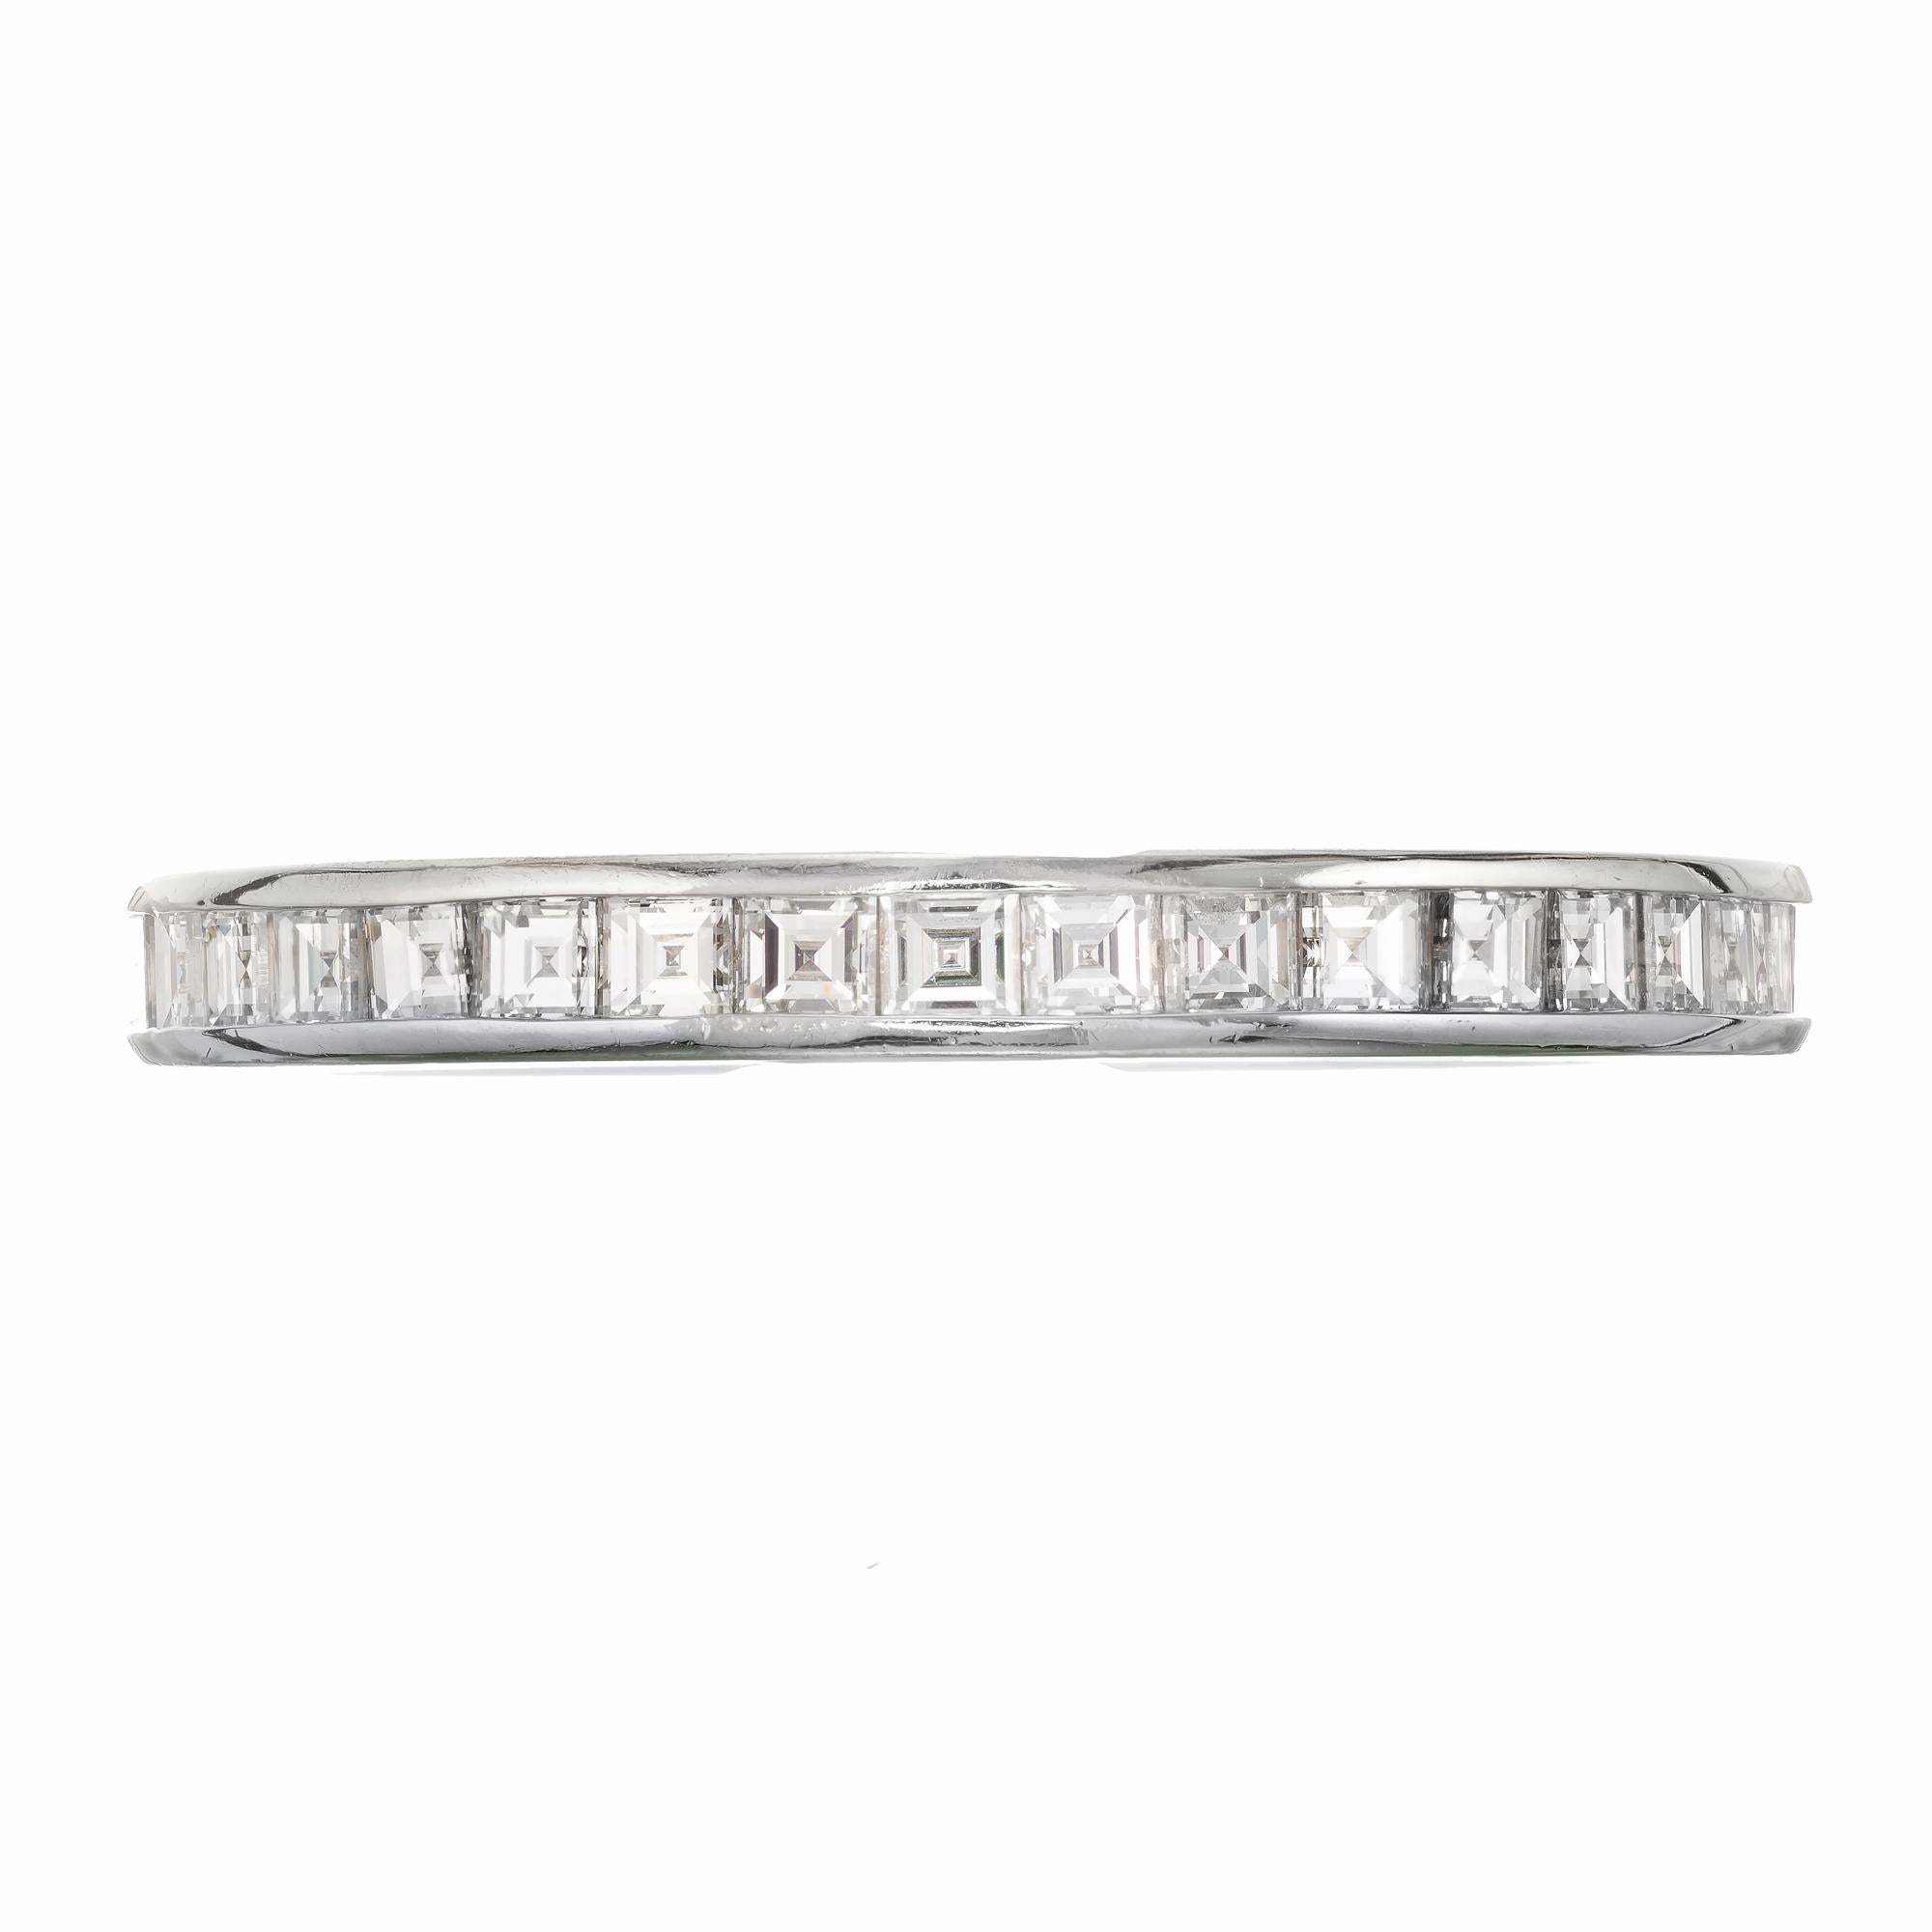 Tiffany & Co. Platinum Eternity ring with square diamonds. Tiffany stamp is a bit faint but correct

3.2 grams
36 square diamonds, approximate total weight .95cts F to G, VS
Size 6 and not sizable
Tested: Platinum
Stamped: Tiffany & Co. 95
Depth: